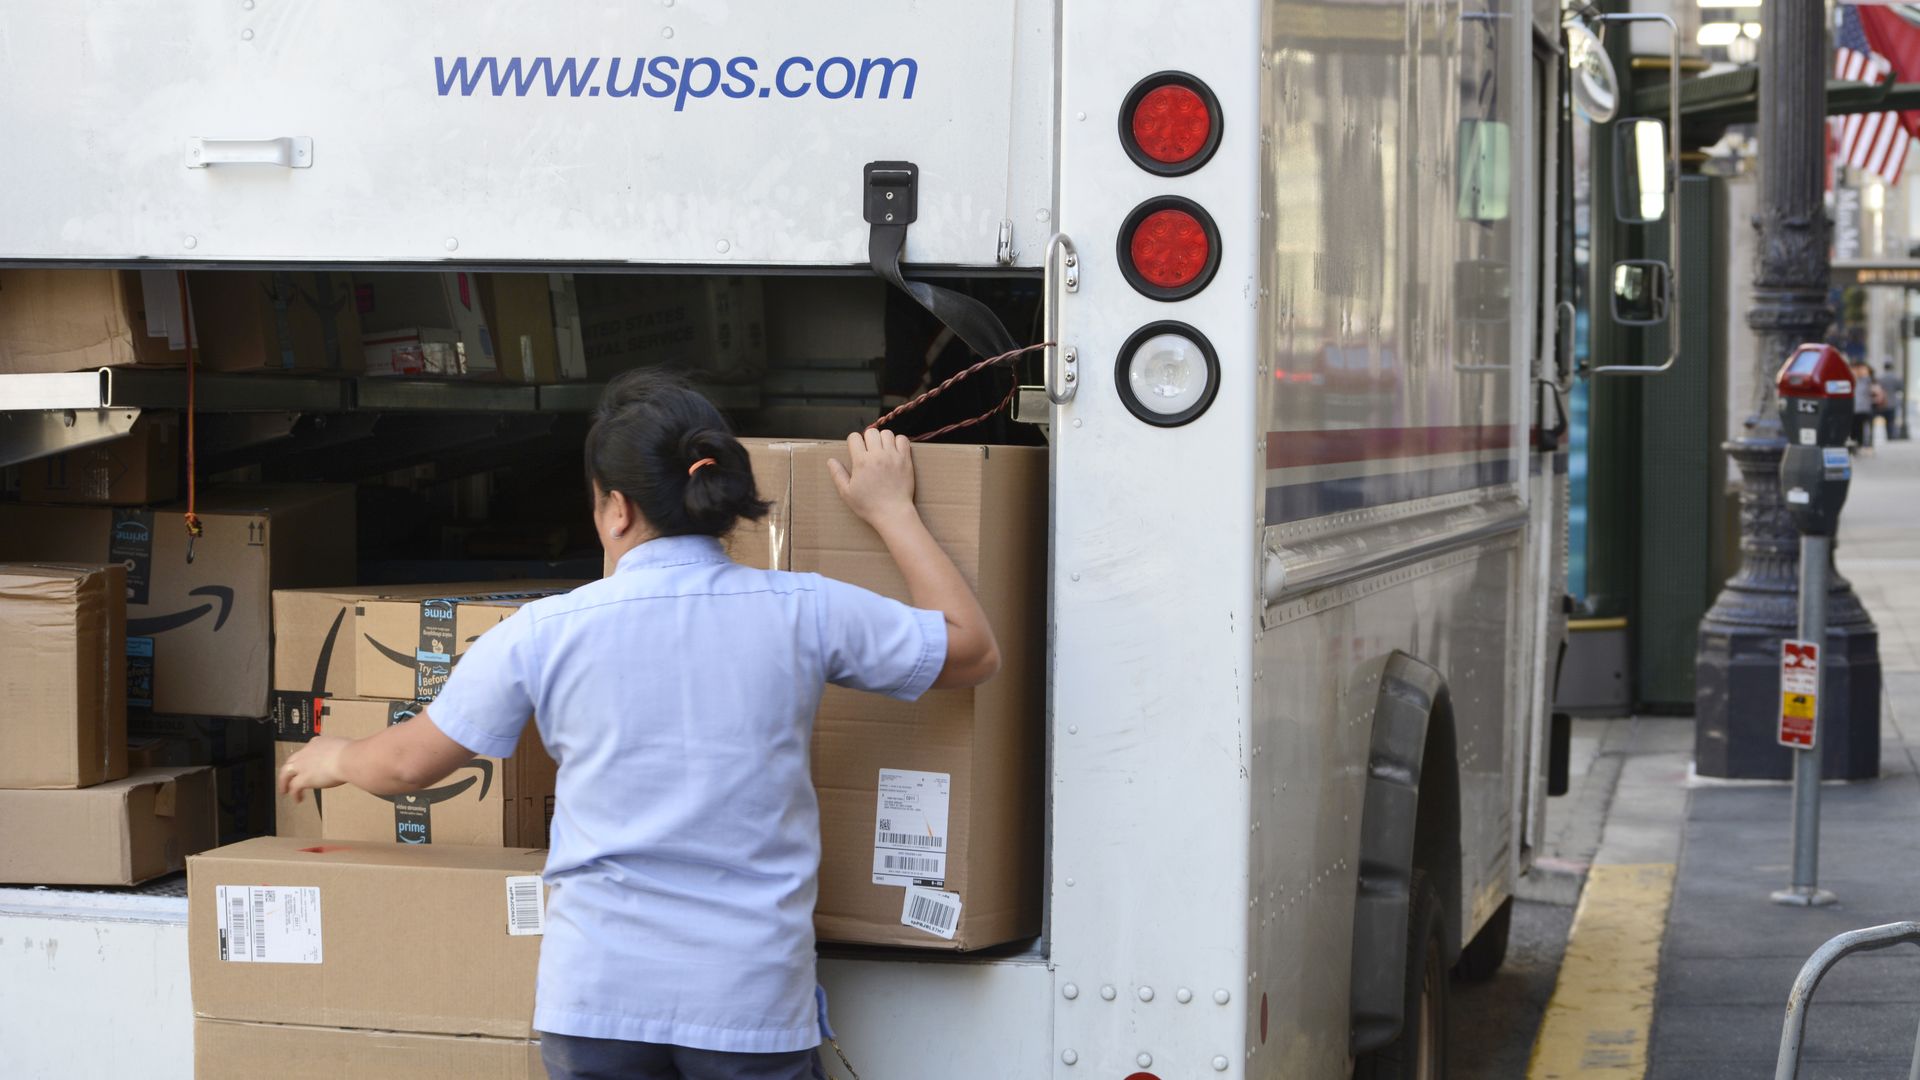 USPS worker loads up Amazon packages in truck.